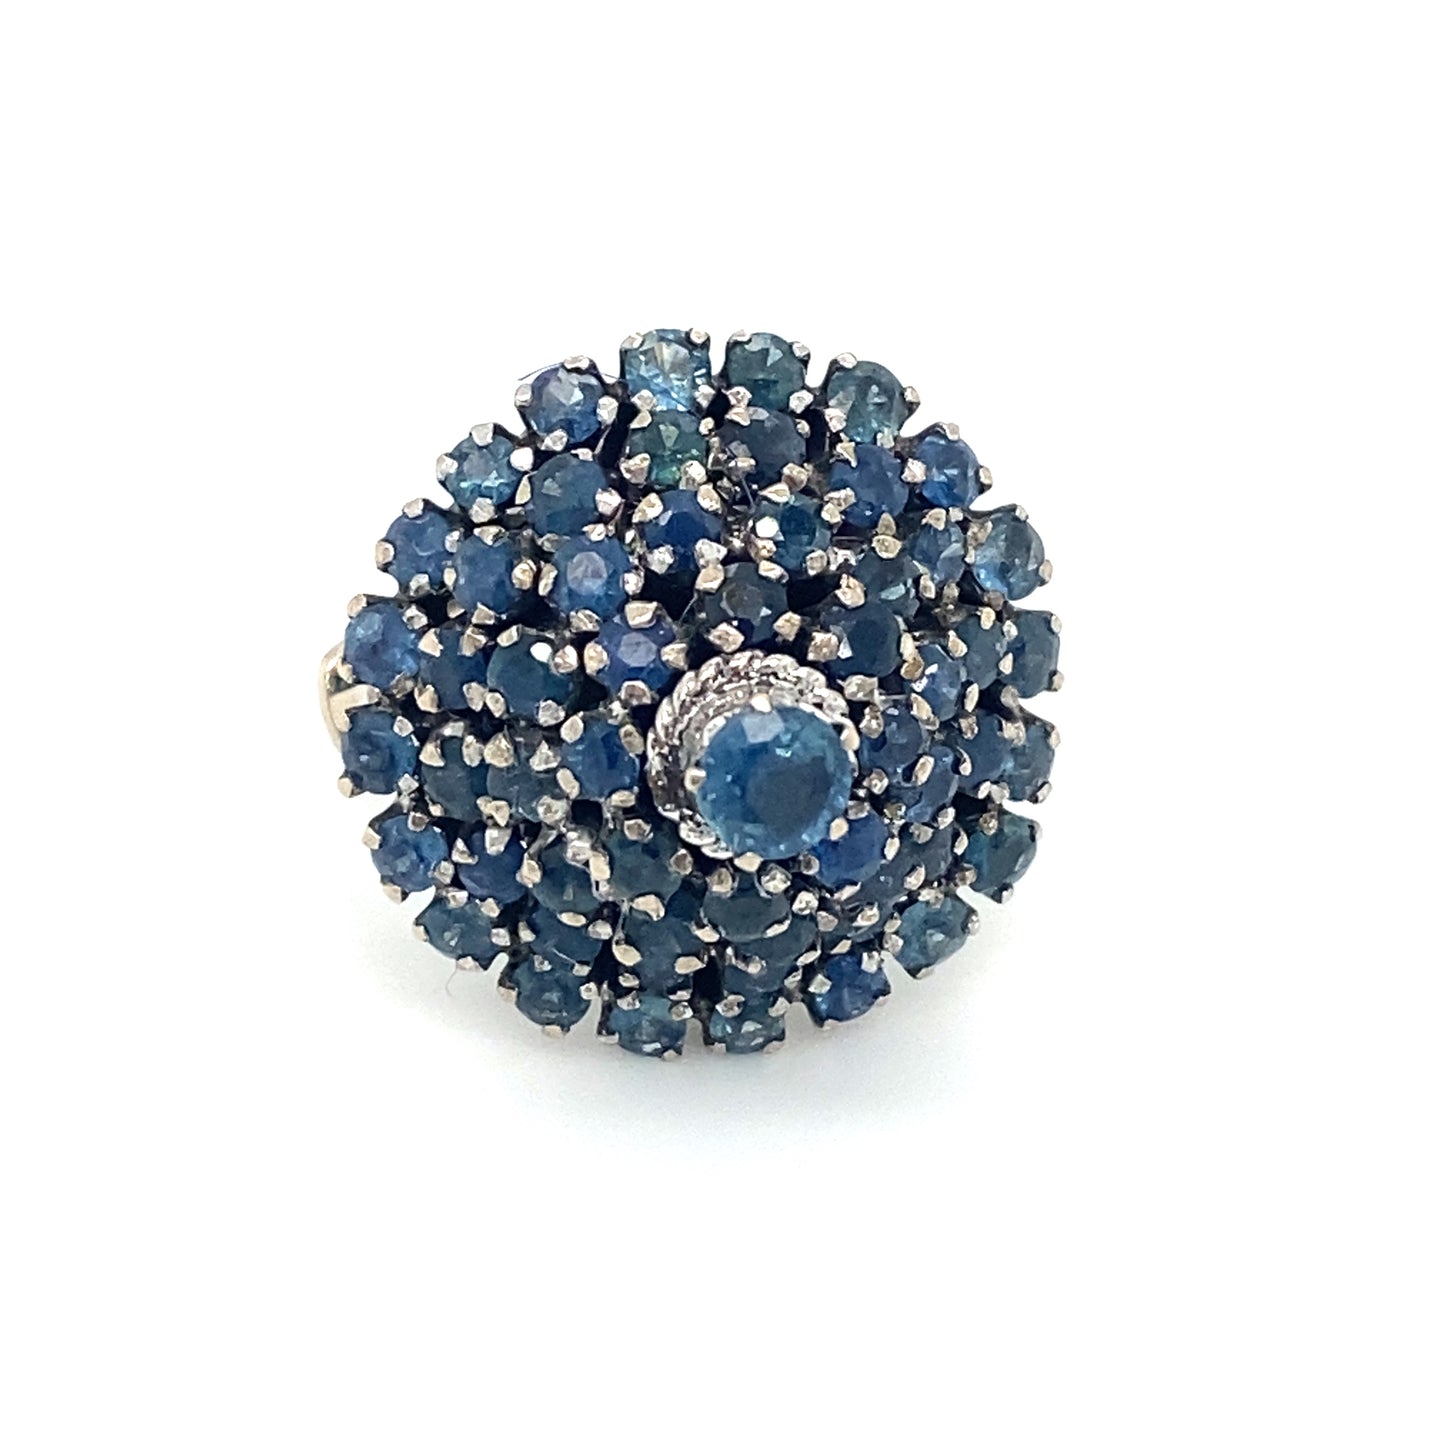 Circa 1950s Sapphire Tiered Princess Ring in 14K White Gold